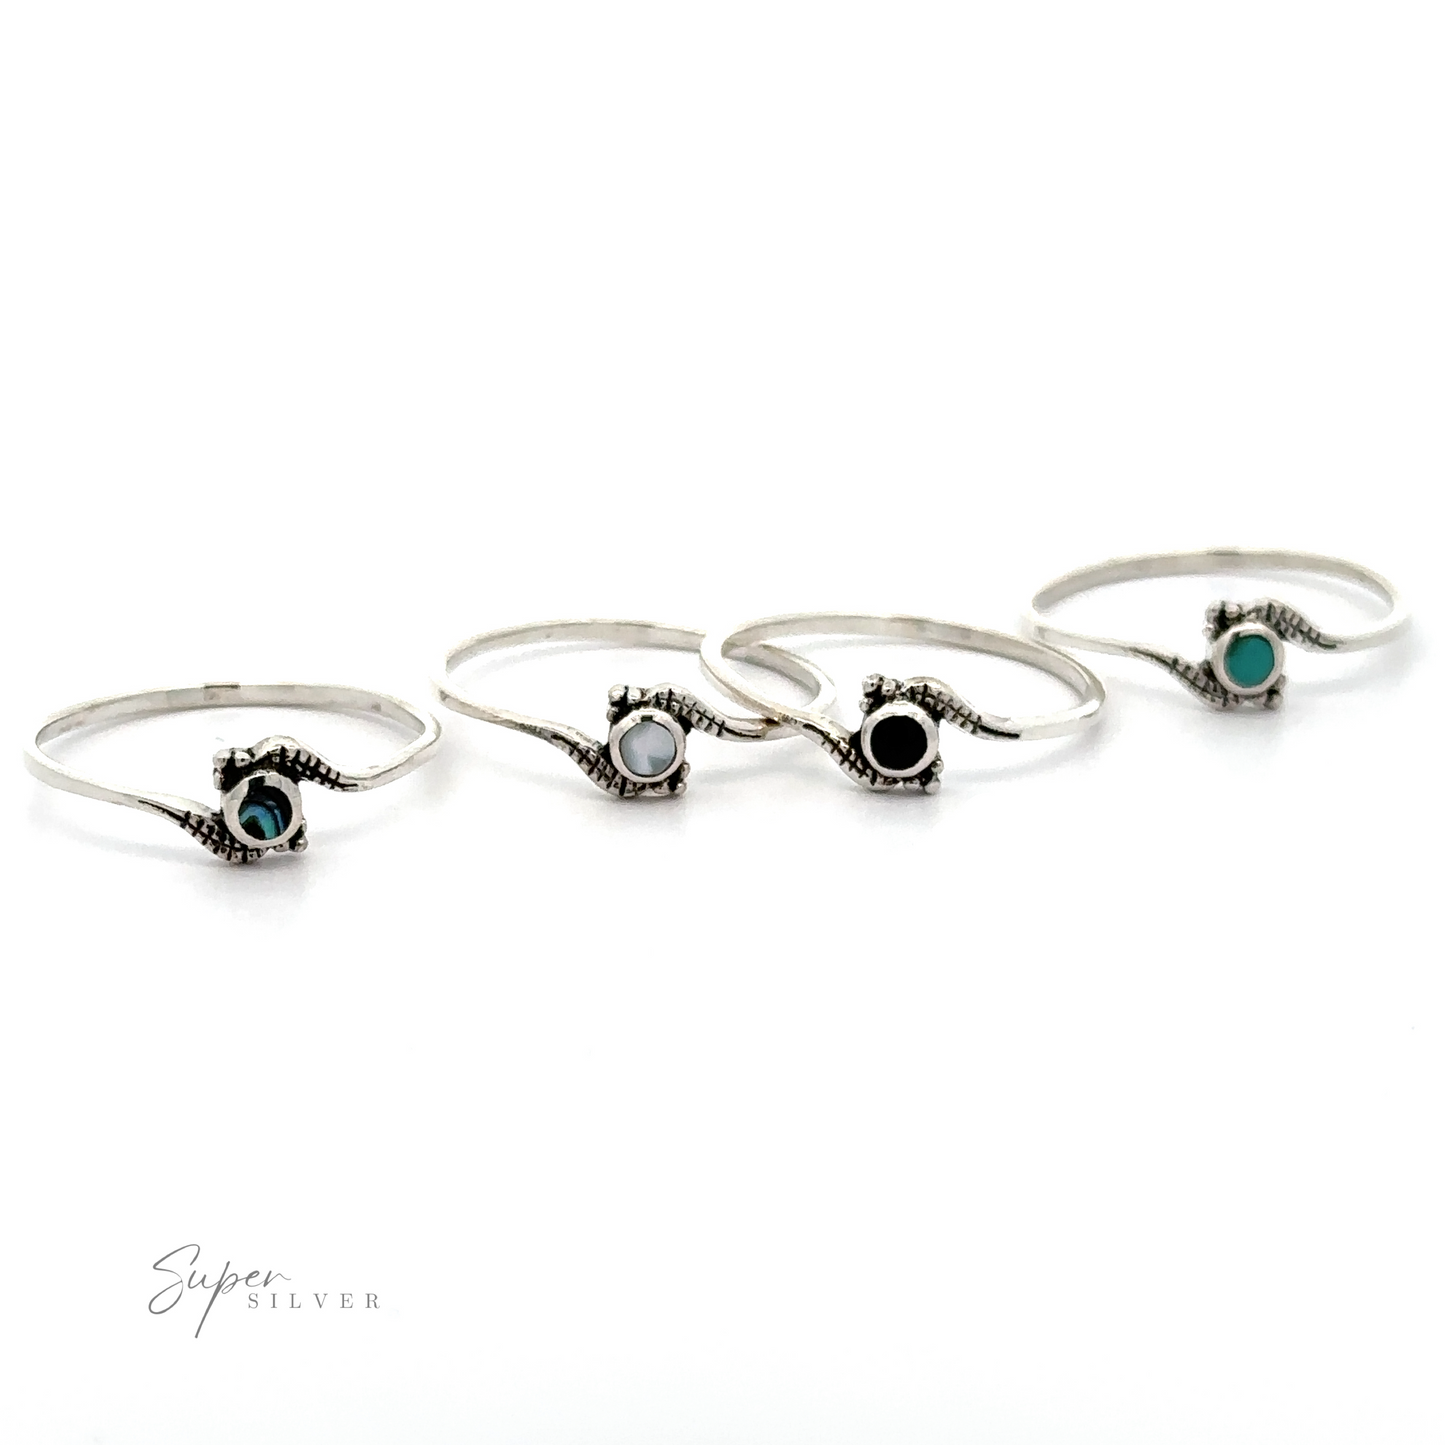 Four Tiny Freeform Rings with Round Inlaid Stones, including turquoise and mother of pearl, displayed in a row against a white background.